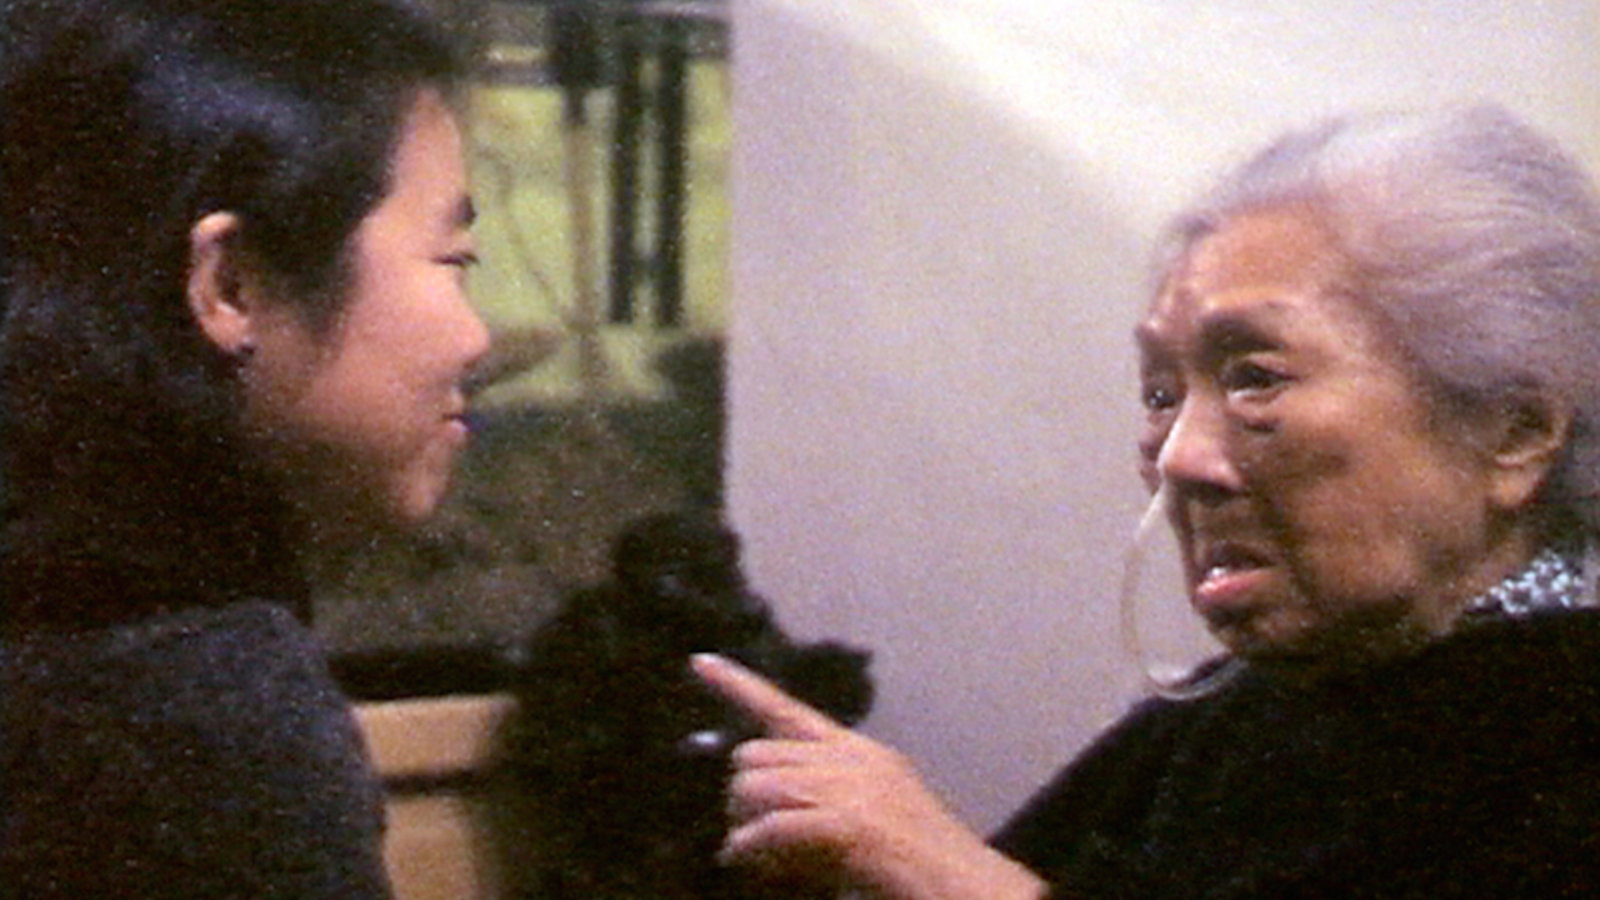 Still from Anita Chang's 65 Years and 6500 Miles Between showing an elderly woman speaking and pointing at a younger woman